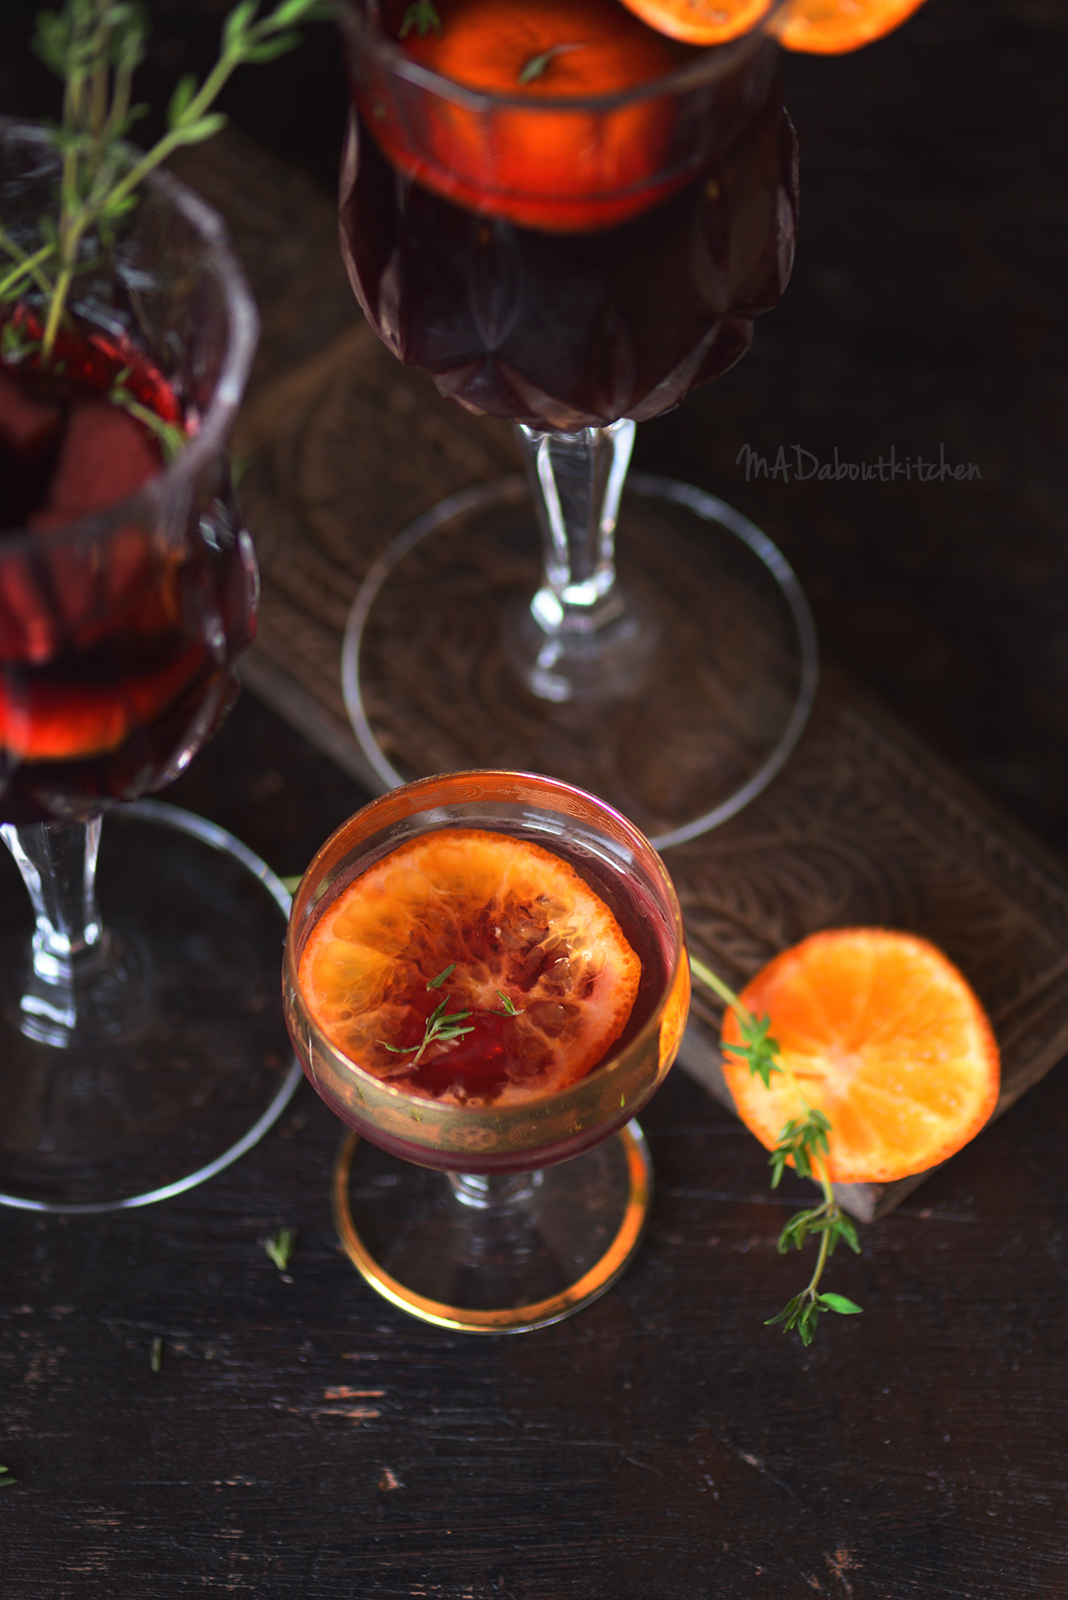 Red Wine Sangria is a punch made using Wine, Chopped fruits, Fruit juice and Alcohol and few other flavours. Here is a recipe for beginners like me who are learning how to make Sangria. Food Photography and Food Styling by Madhuri Aggarwal.